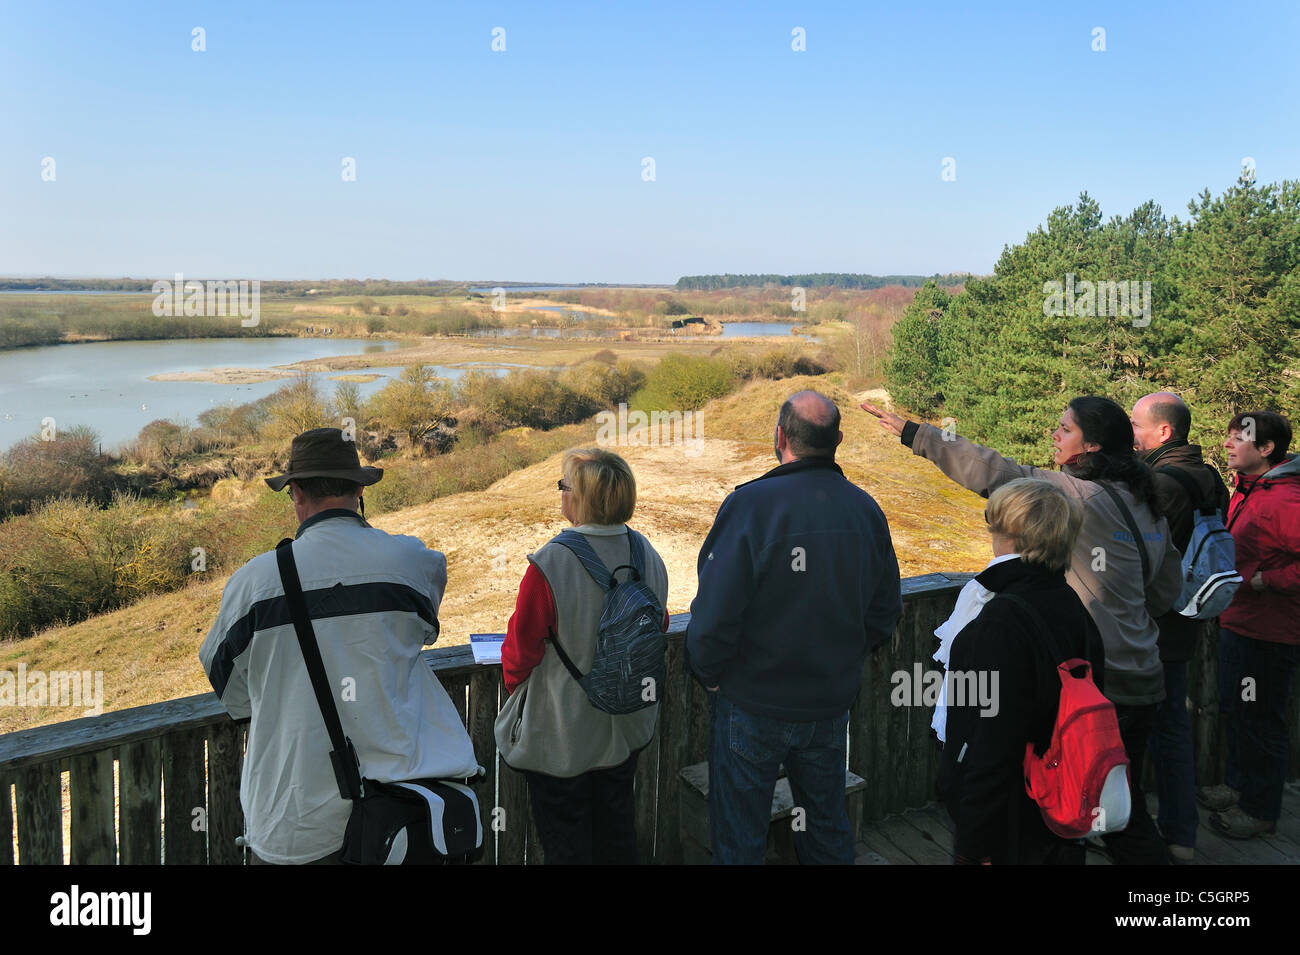 Guide with tourists on viewing platform looking over wetland of nature reserve Parc du Marquenterre, Bay of the Somme, France Stock Photo